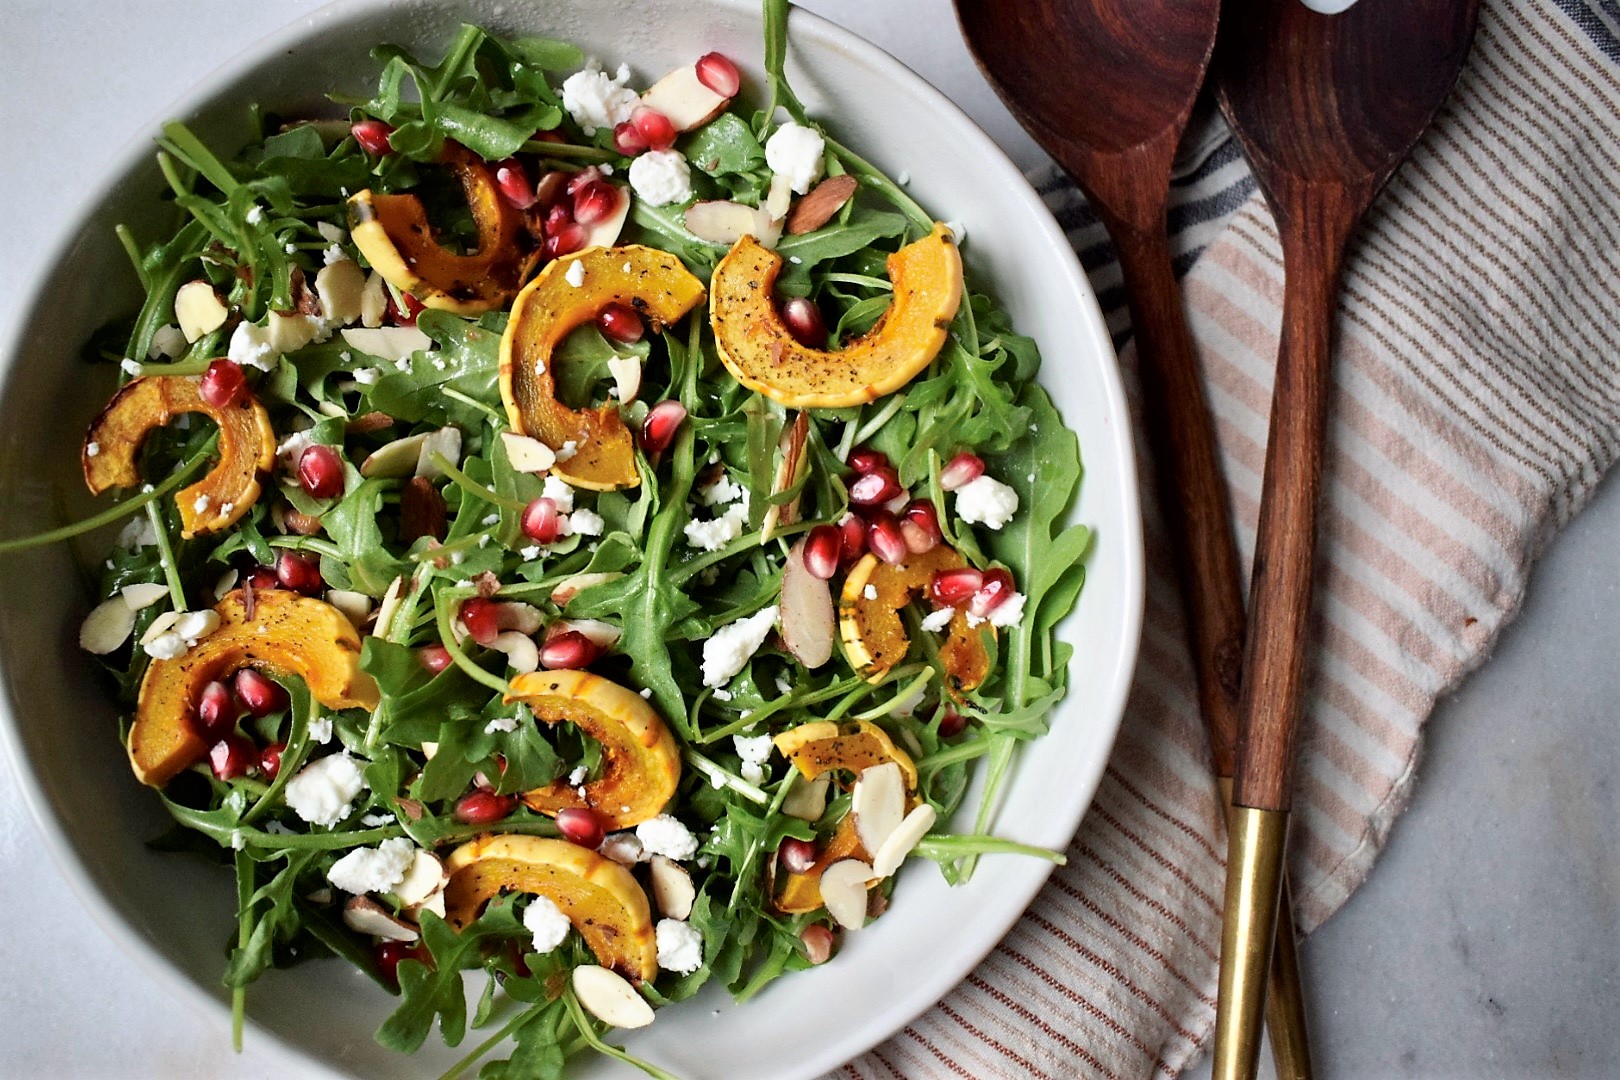 Delicata Squash Salad with Pomegranate, Almonds and Goat Cheese